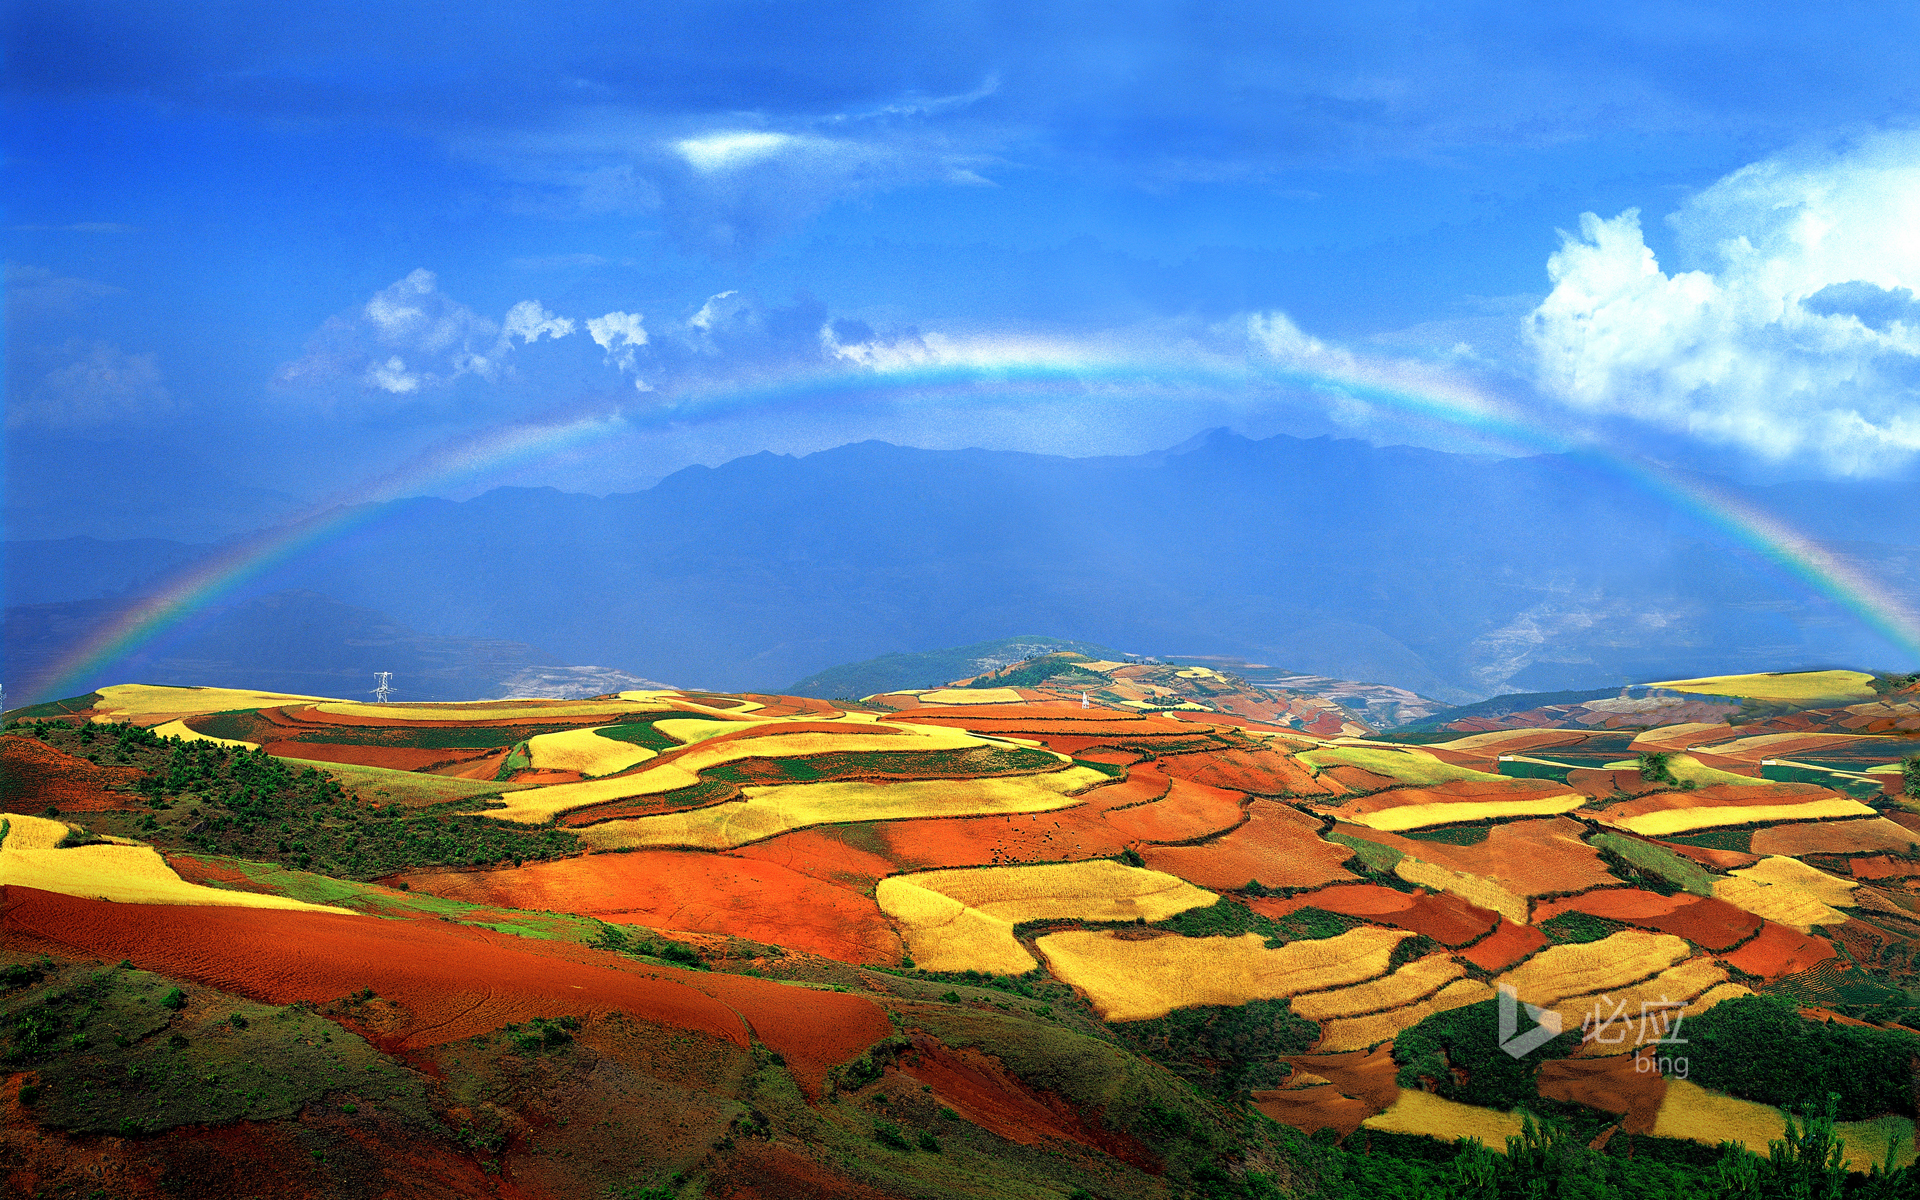 Rainbow over red land